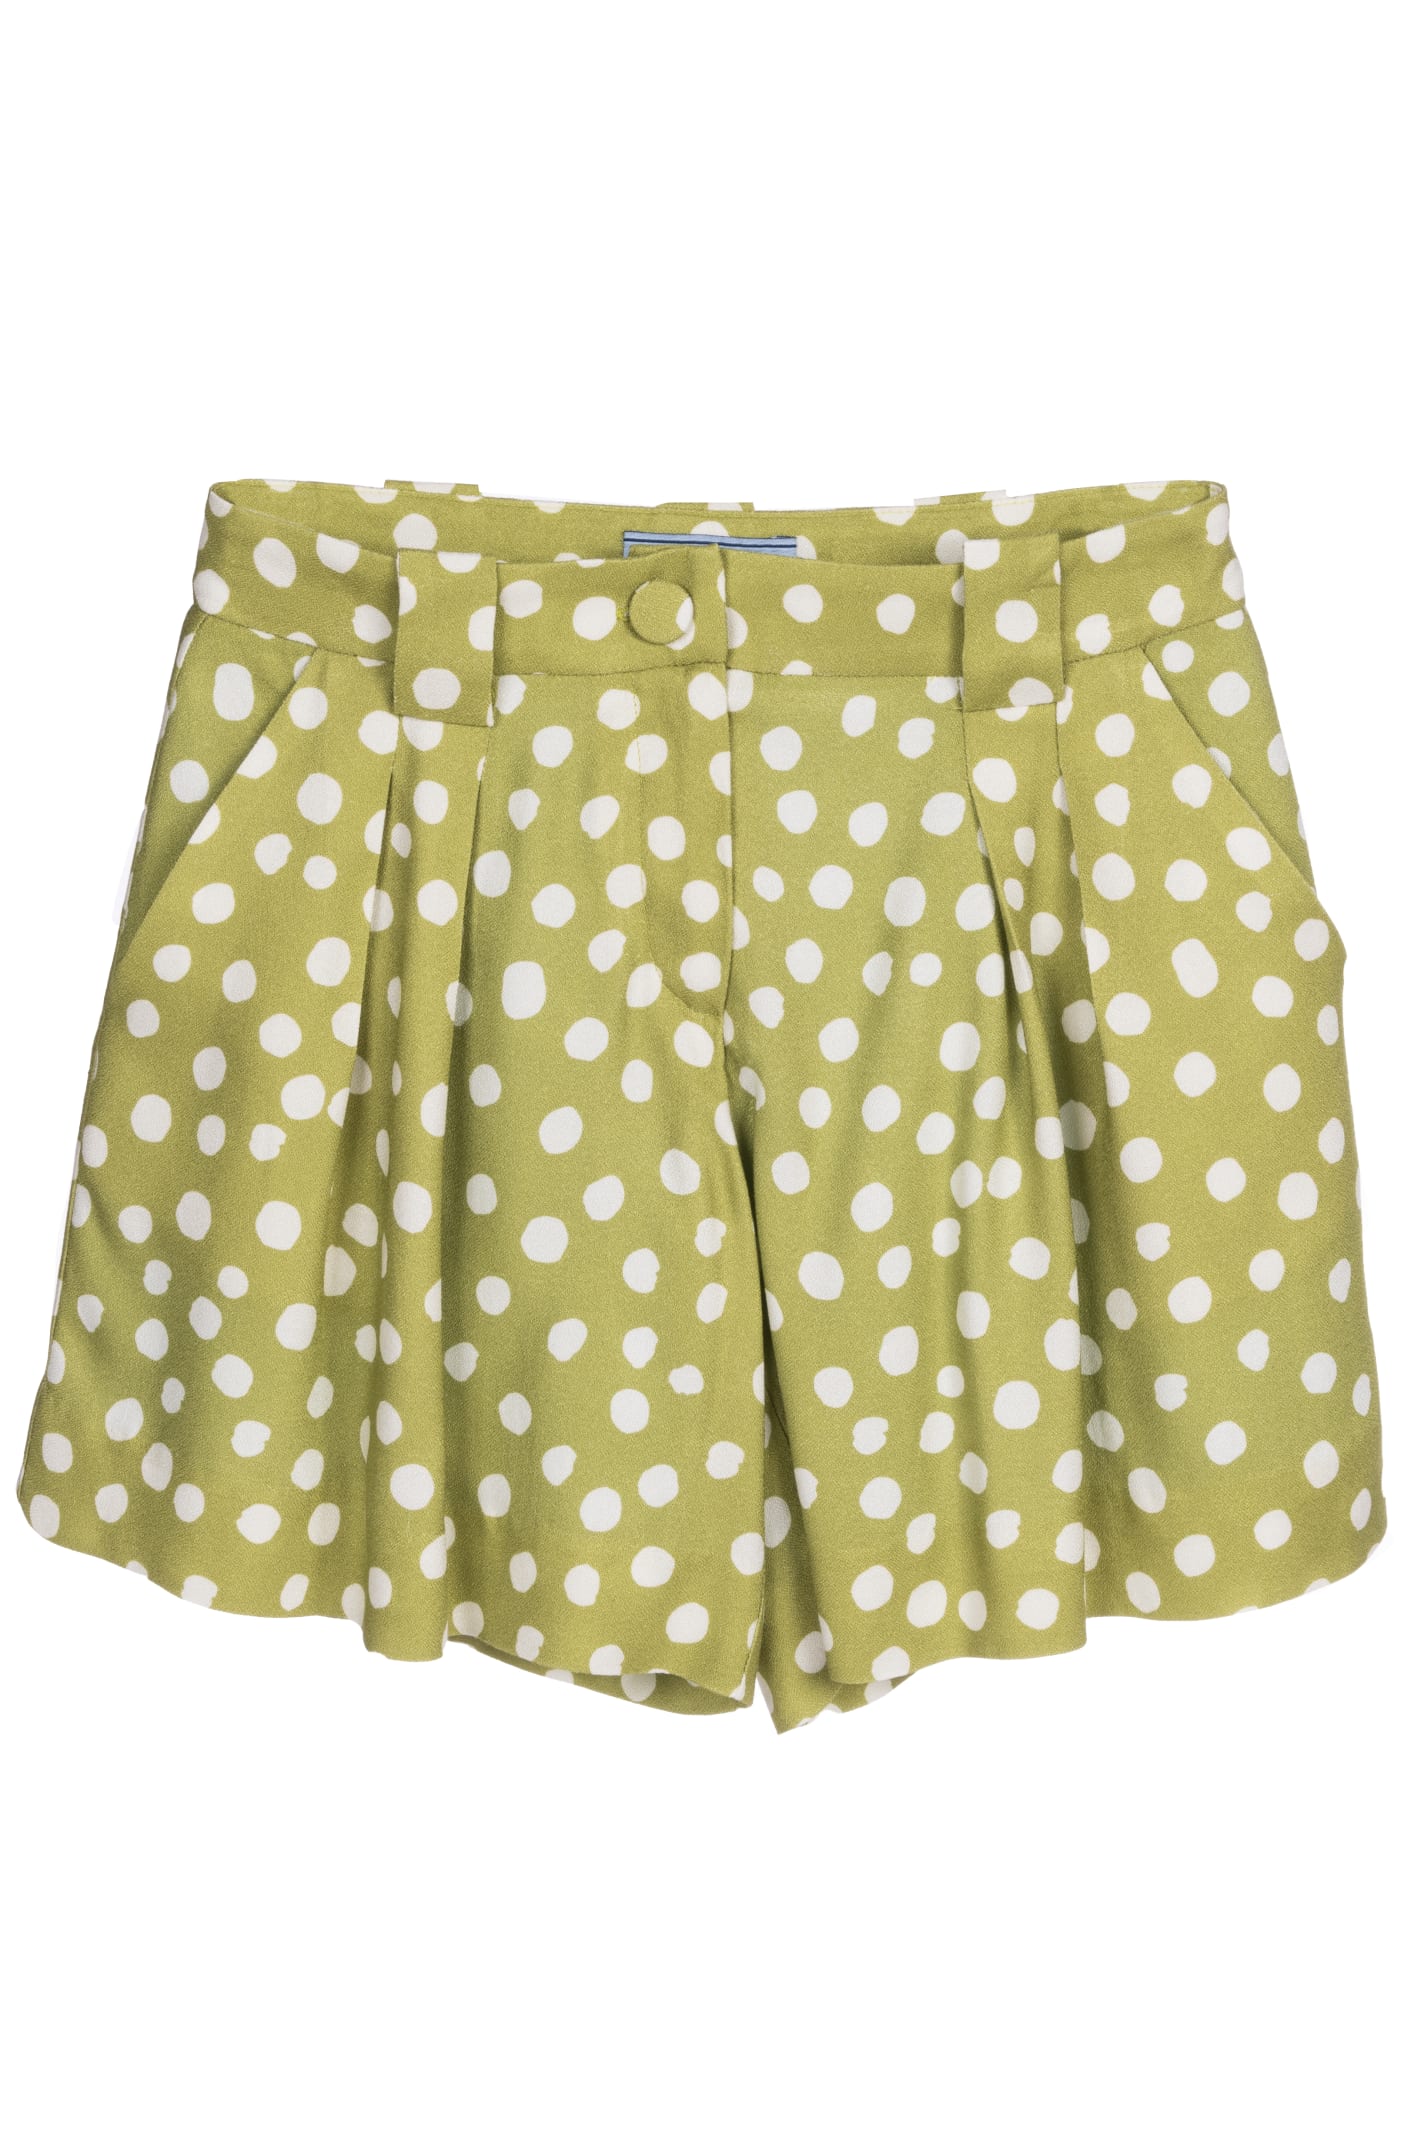 Mimisol Kids' Shorts A Pois In Green